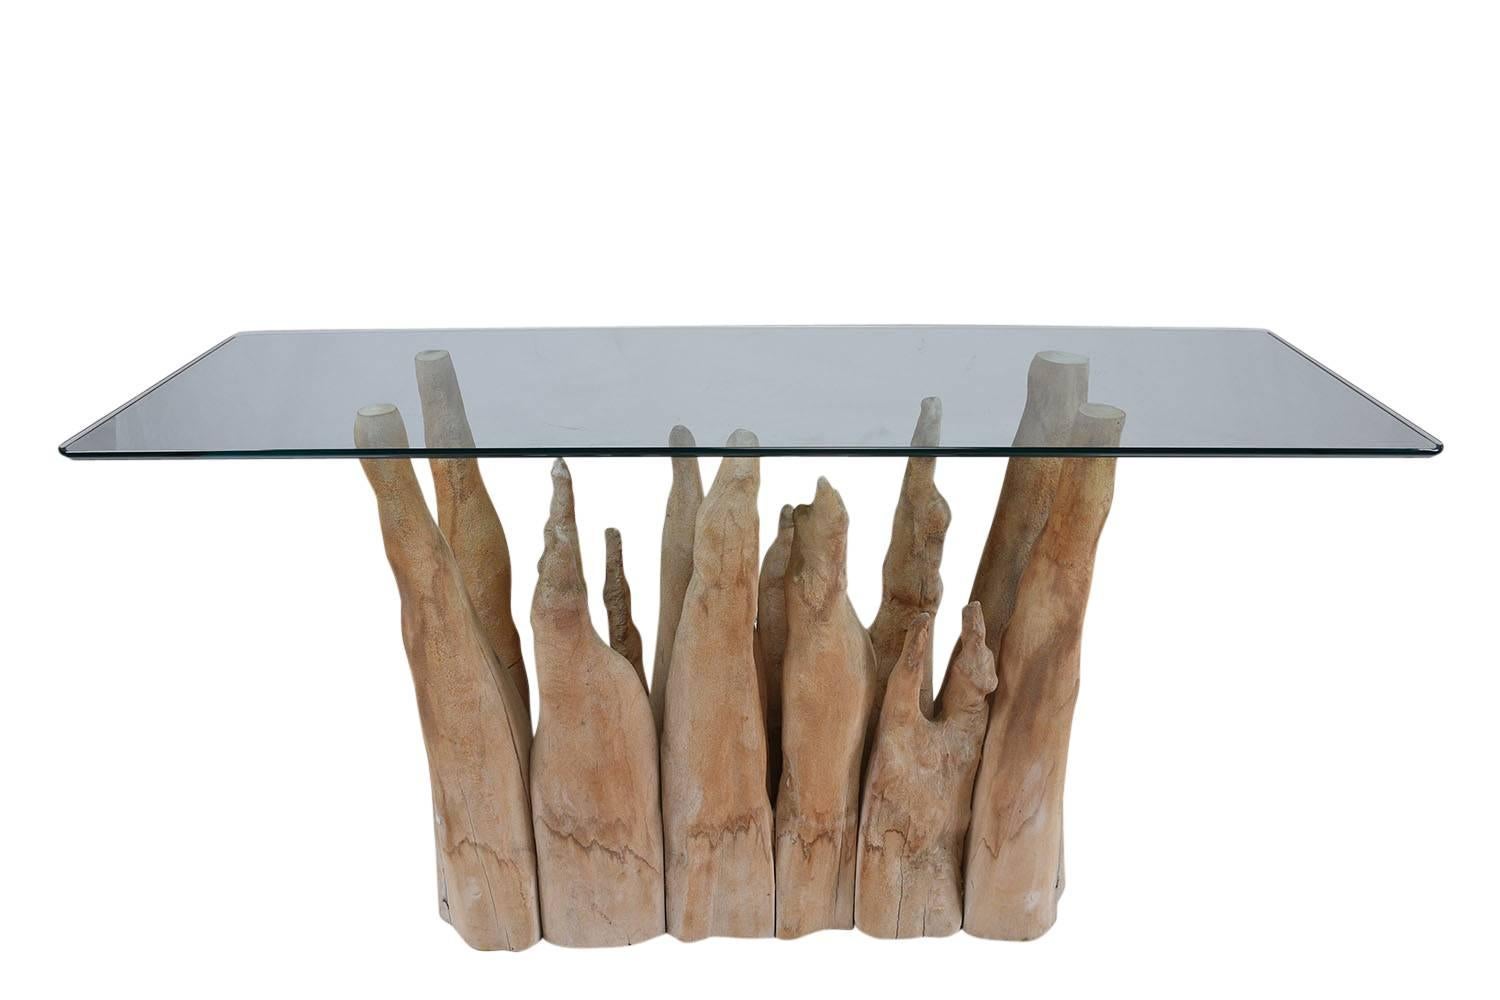 This 1970s vintage sofa table is made by Michael Taylor and is very unique with a natural wood base. The organic shaped tree branches form an eye-catching base that is both sturdy and contemporary. The top of the table is a clear glass top with an